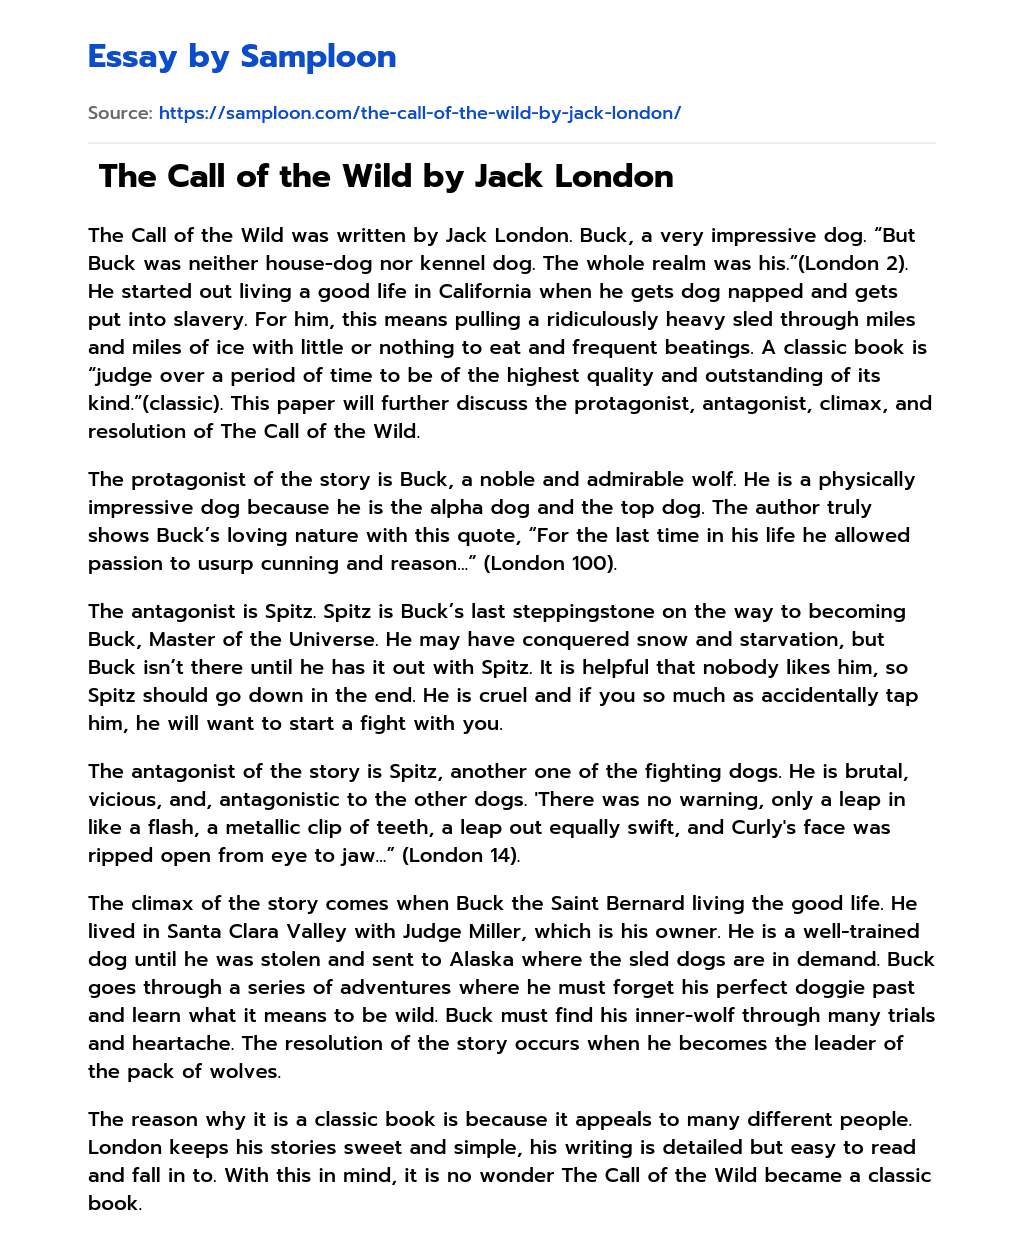  The Call of the Wild by Jack London essay